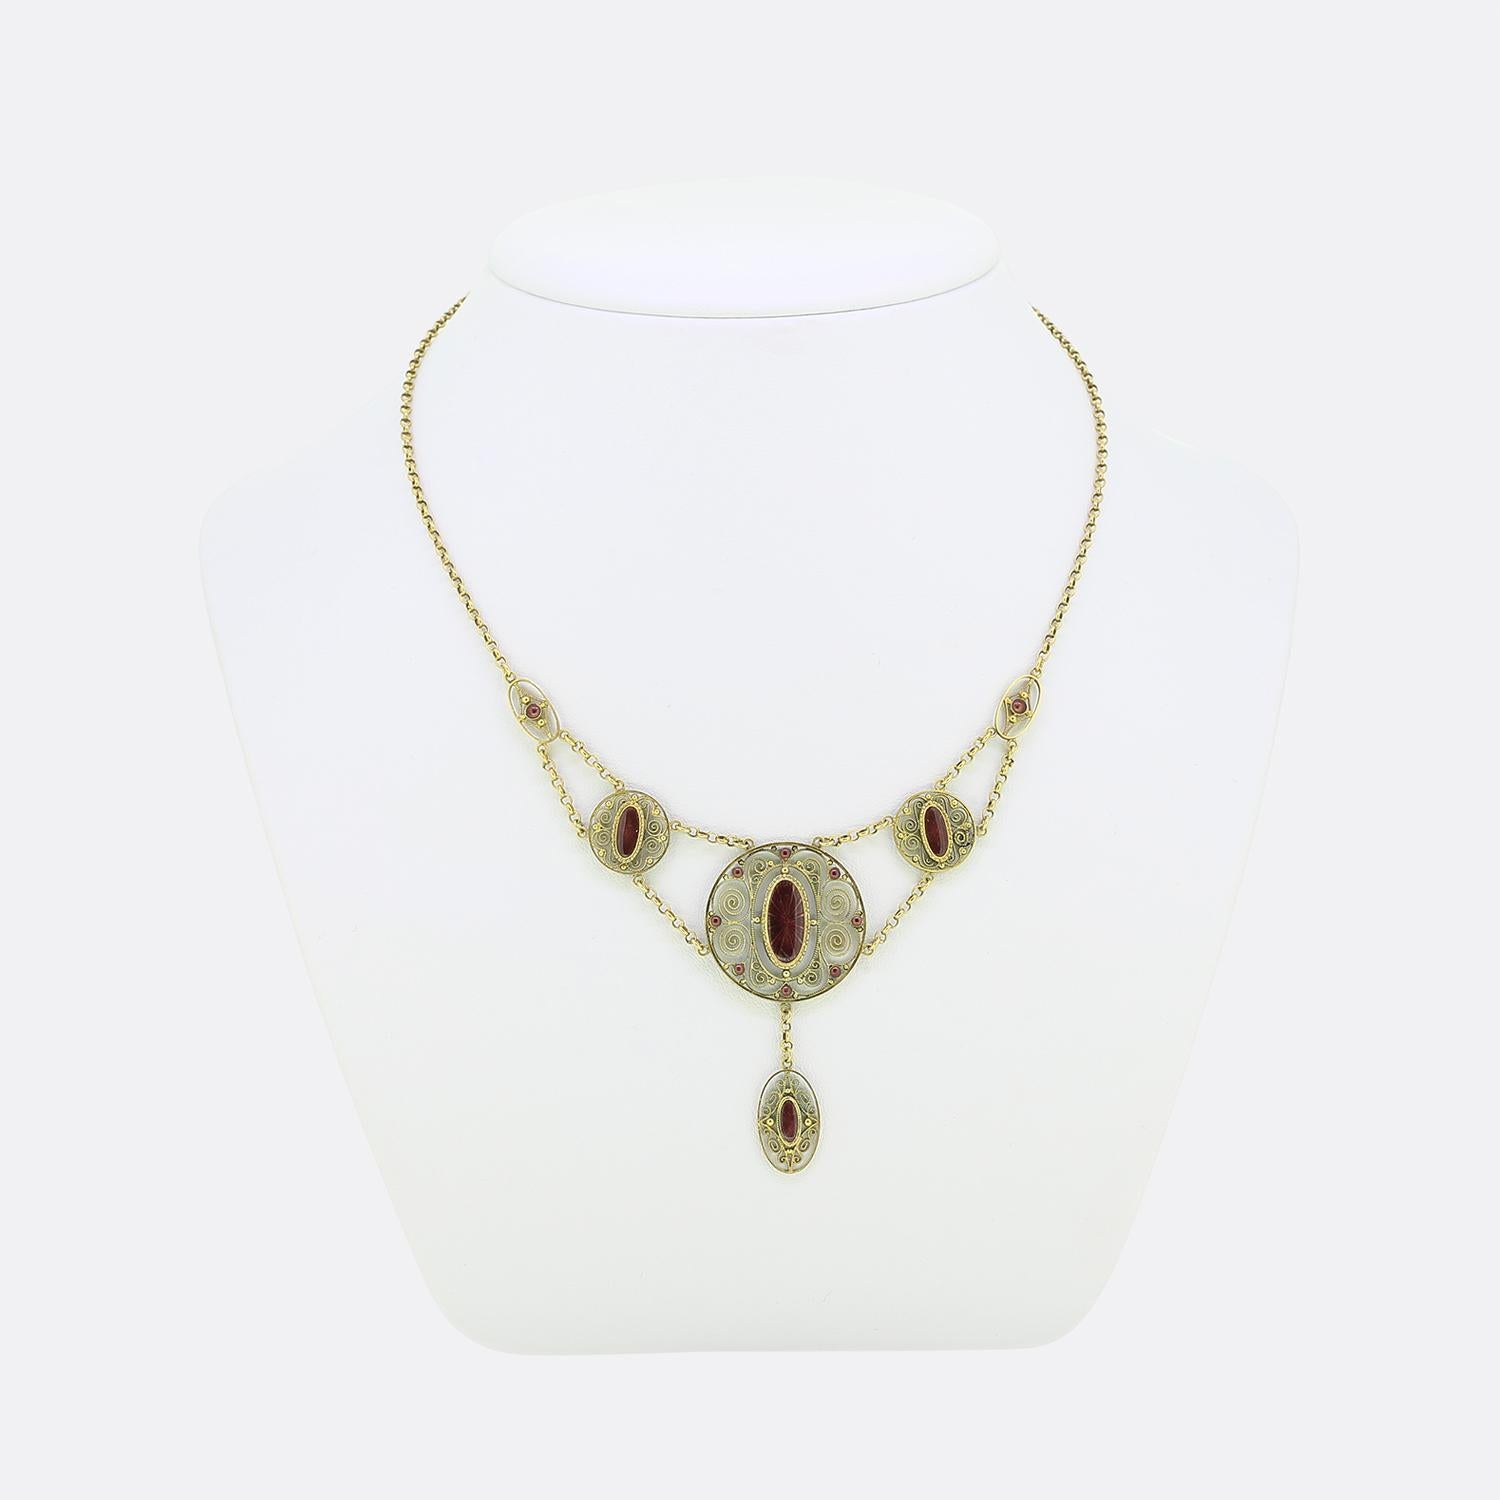 Here we have a delightful festoon necklace crafted at a time when the Arts and Crafts movement was at its pinnacle. A 14ct yellow gold belcher style chain suspends multiple matching round and oval shaped motifs consisting of ornate curvaceous